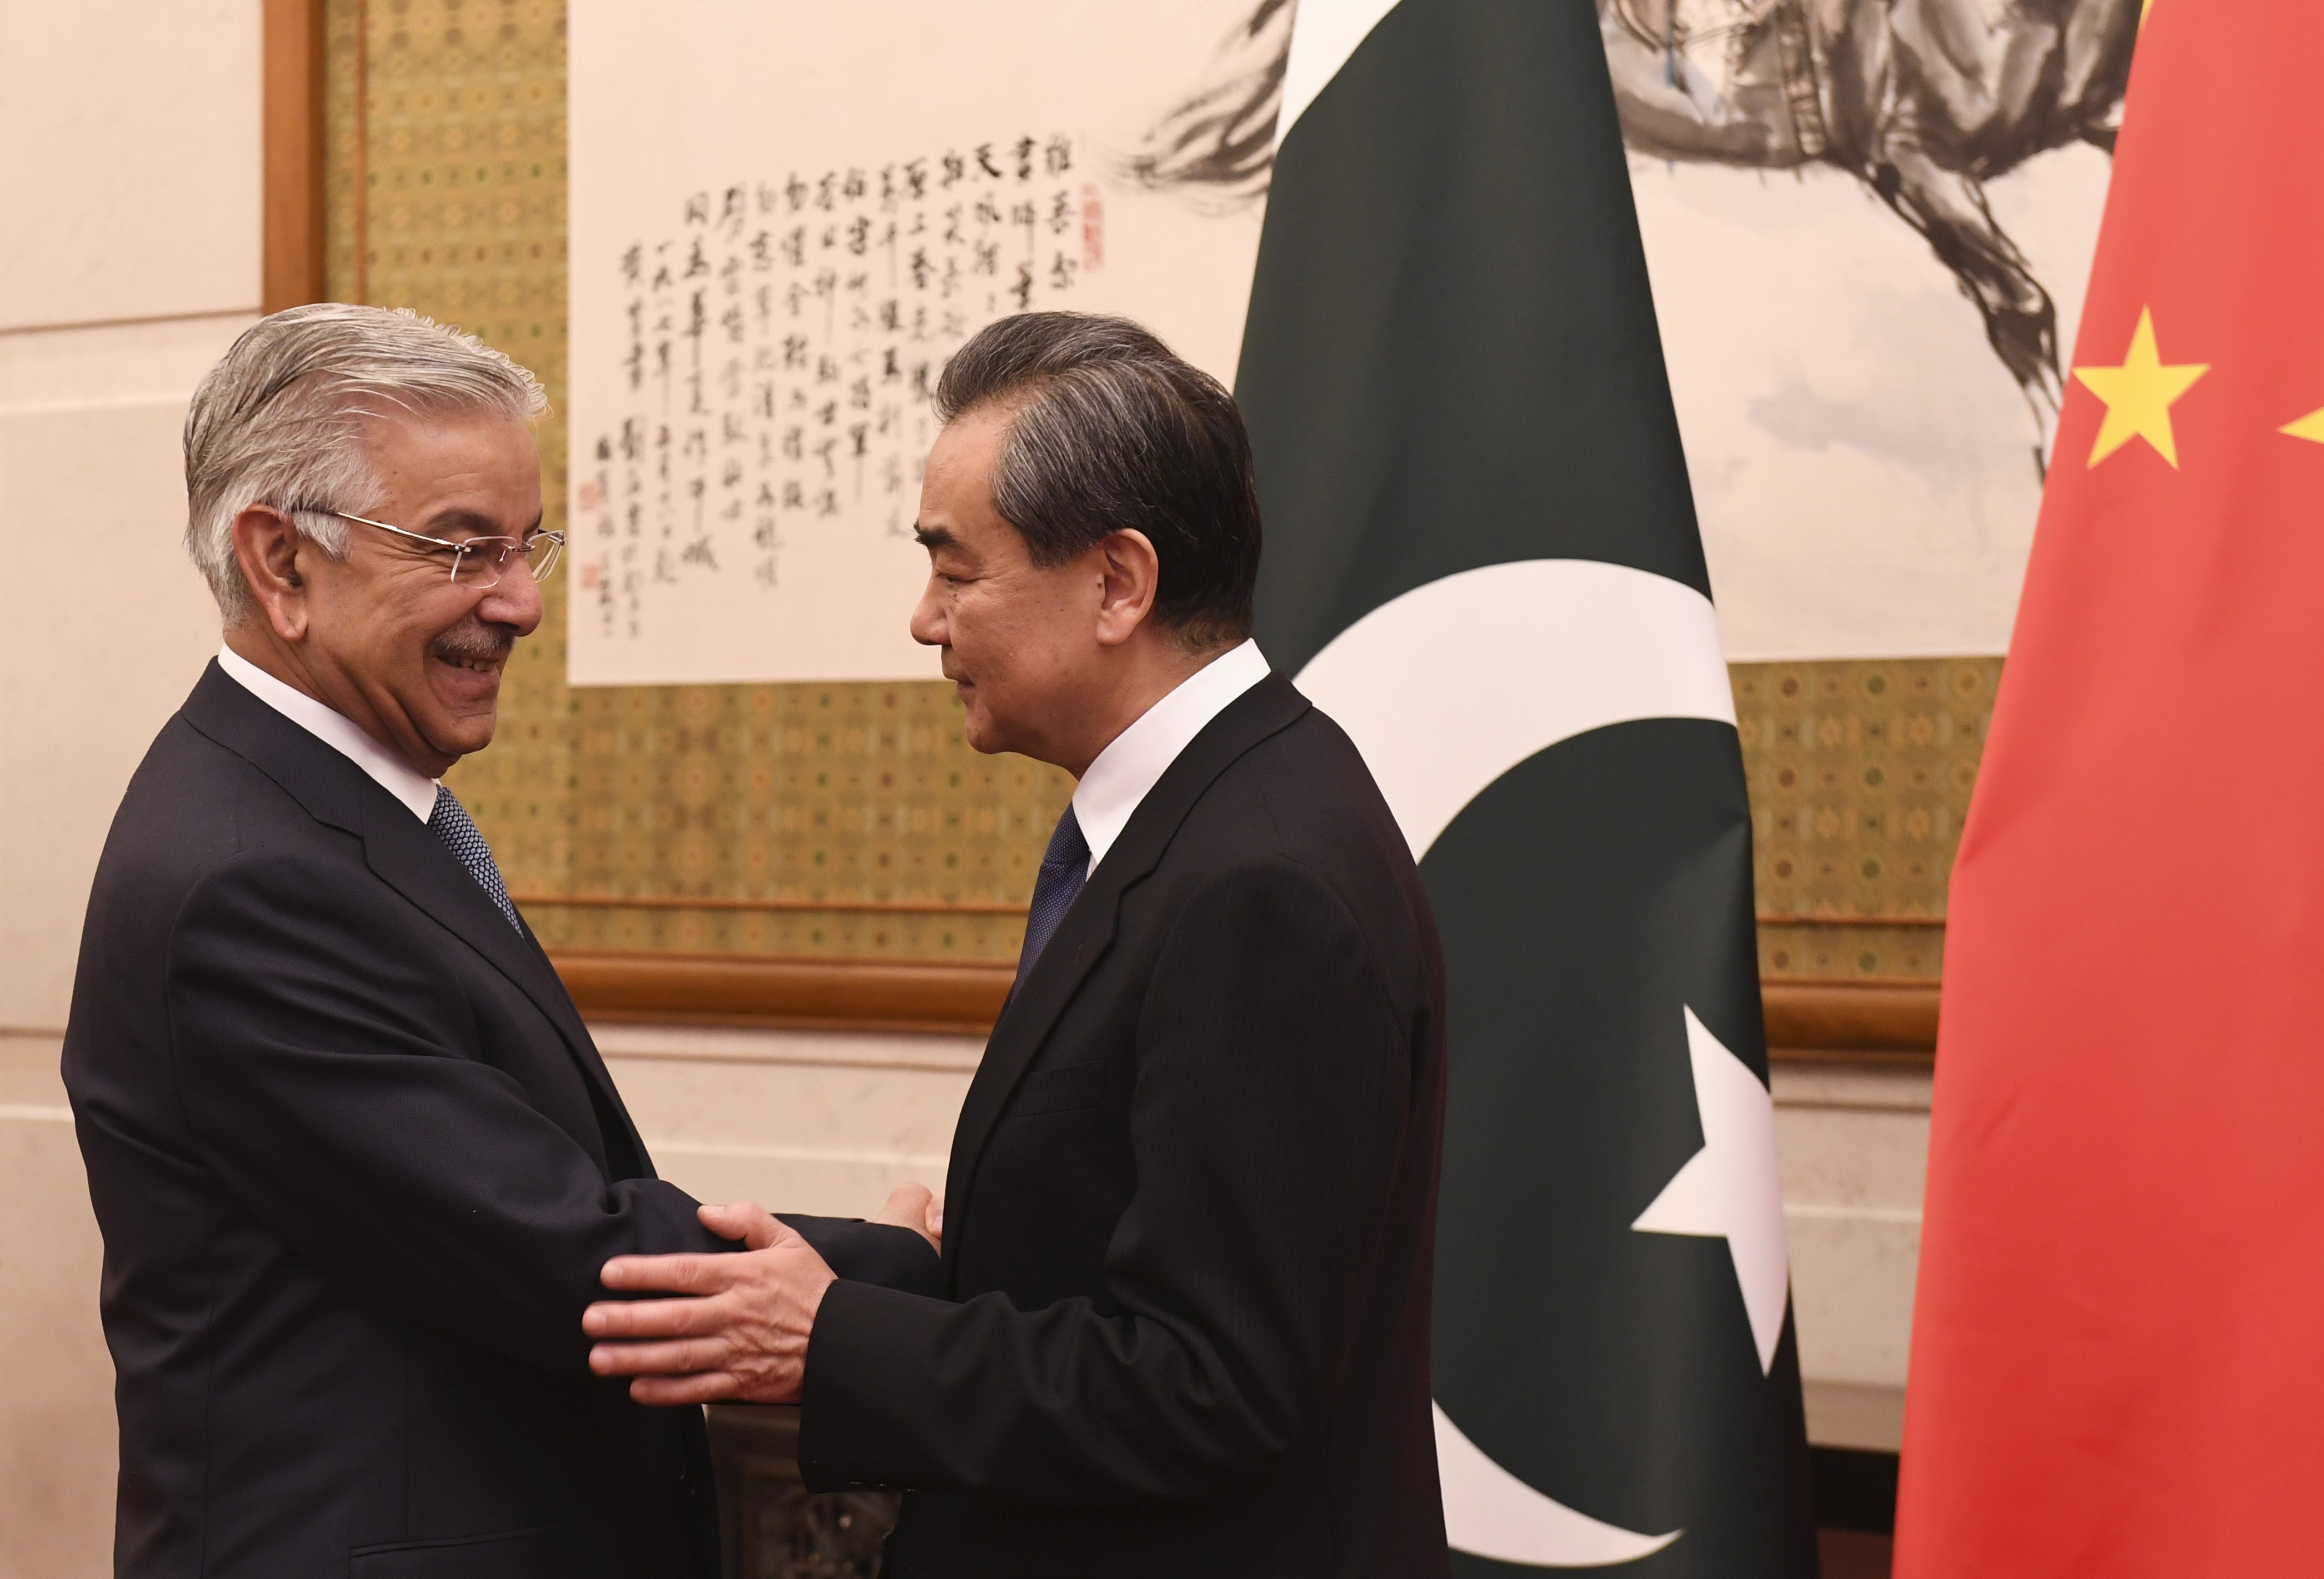 Pakistan’s Foreign Minister Khawaja Muhammad Asif (left) shakes hands with Chinese Foreign Minister Wang Yi at the Diaoyutai State Guest House in Beijing on April 23. Photo: AFP